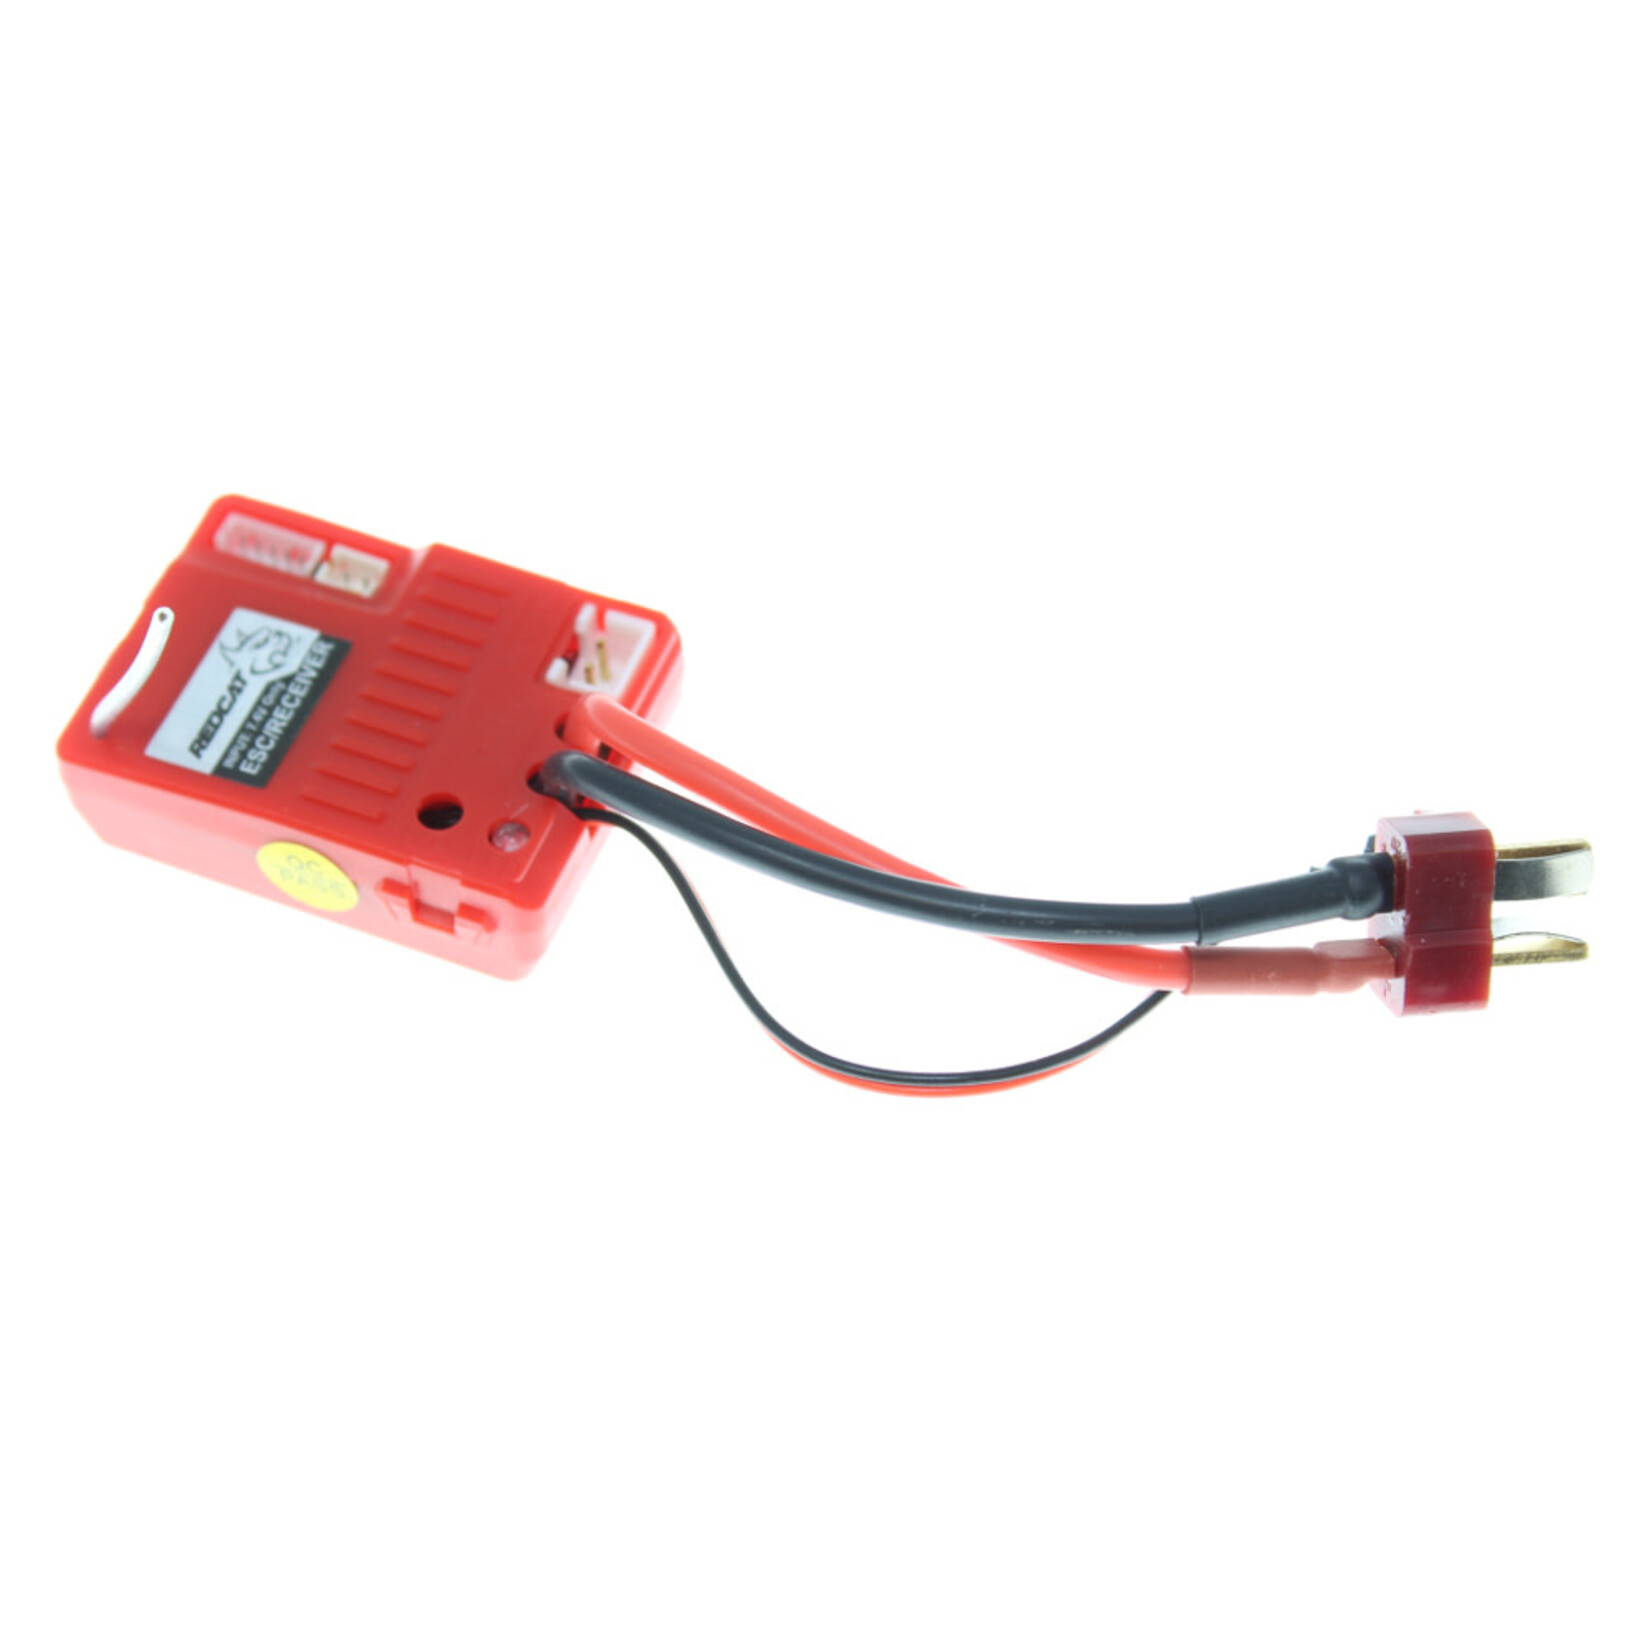 Redcat Racing RER13651 2 in 1 ESC/RX Unit V1 (5-Wire)( 1pc)